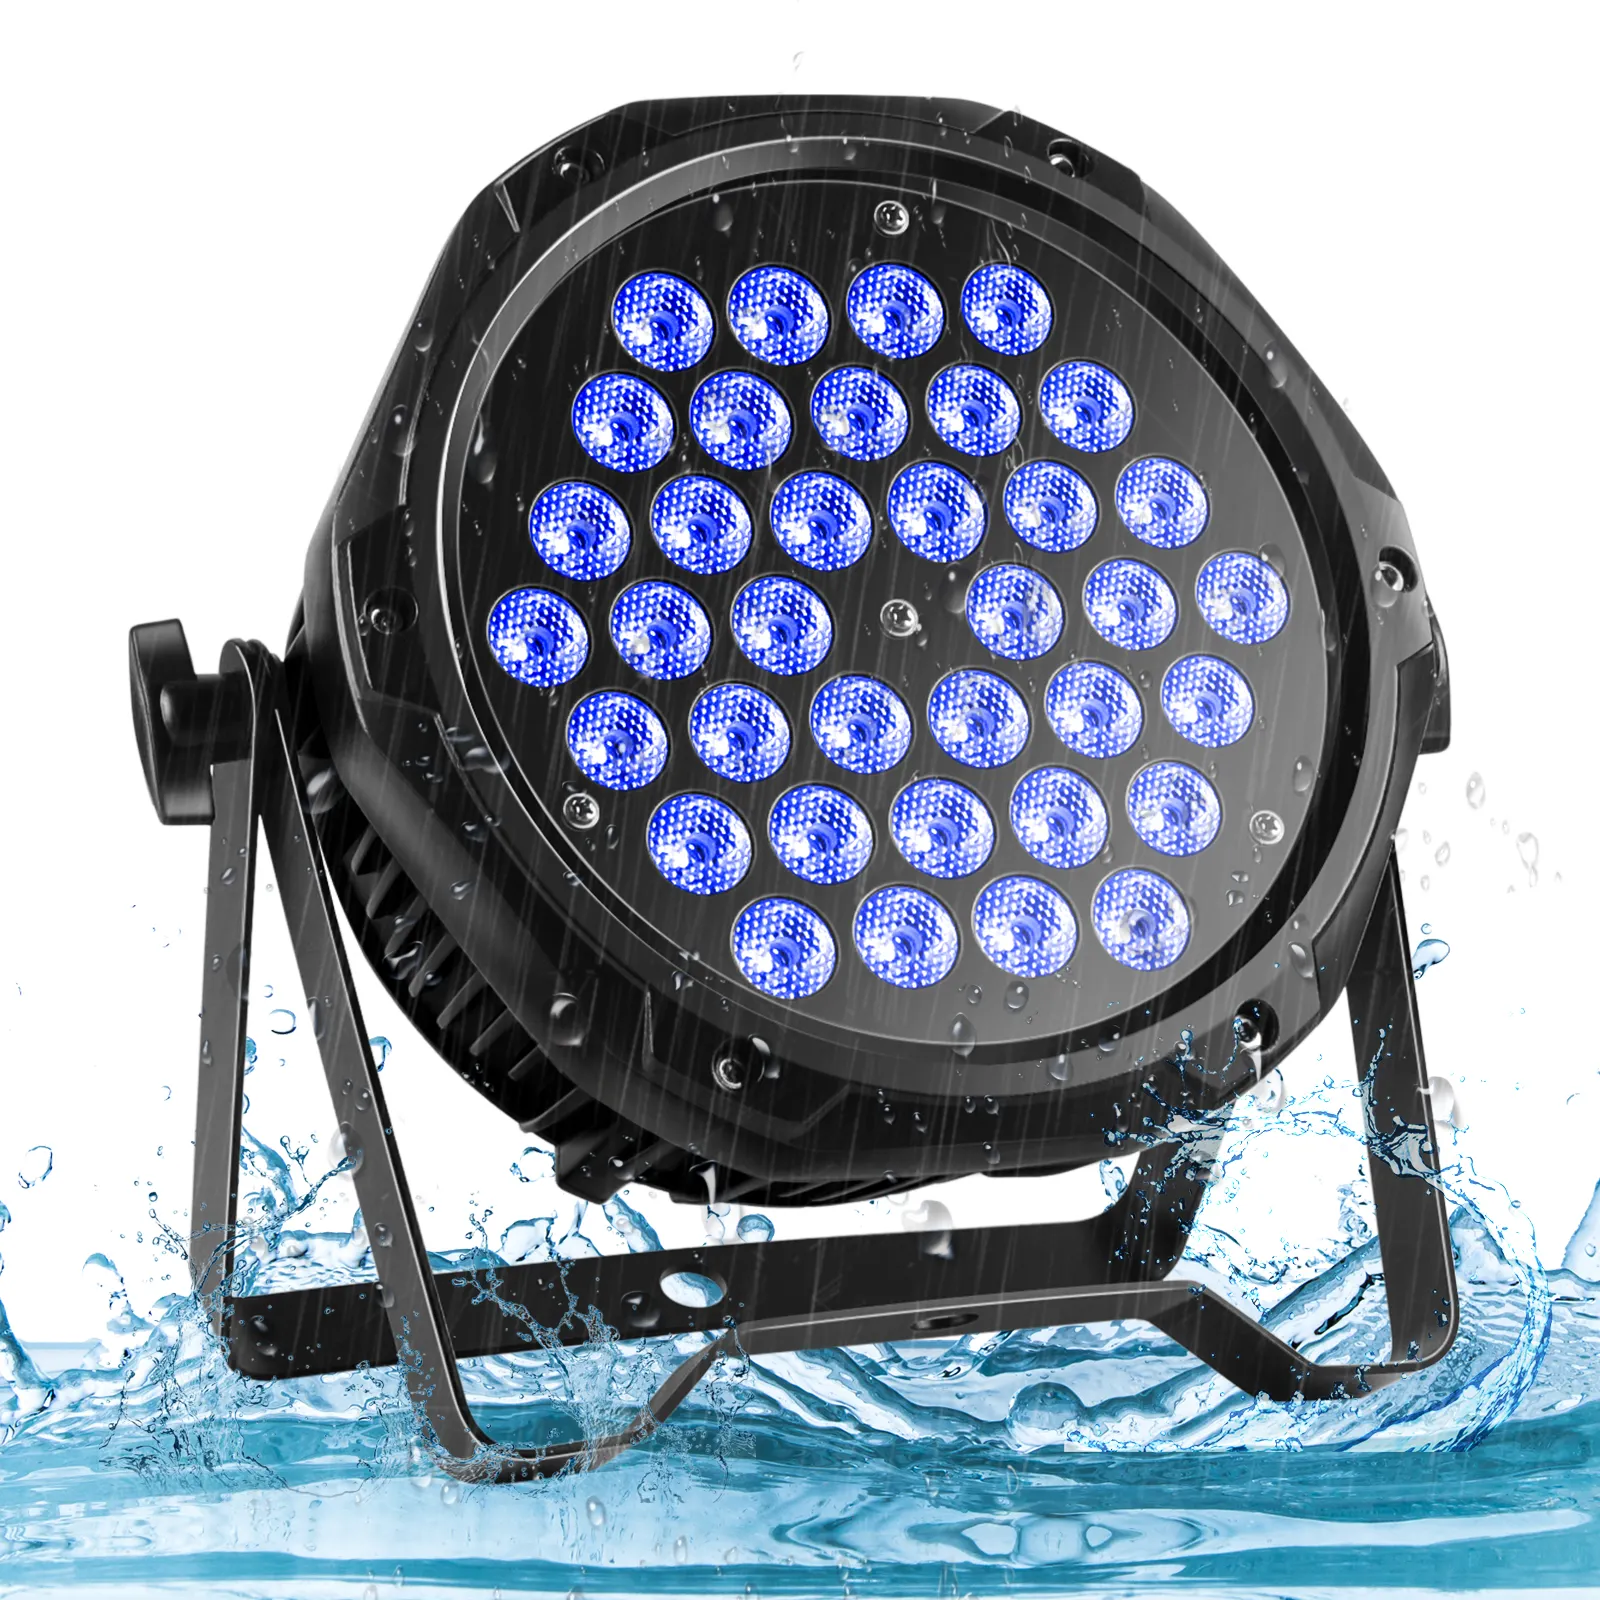 IP65 Waterproof 36PCS RGB 3-IN 1 LED Lighting Outdoor Stage Par Light DMX Control Muted Upligting Party Wash Light Strobe Effect